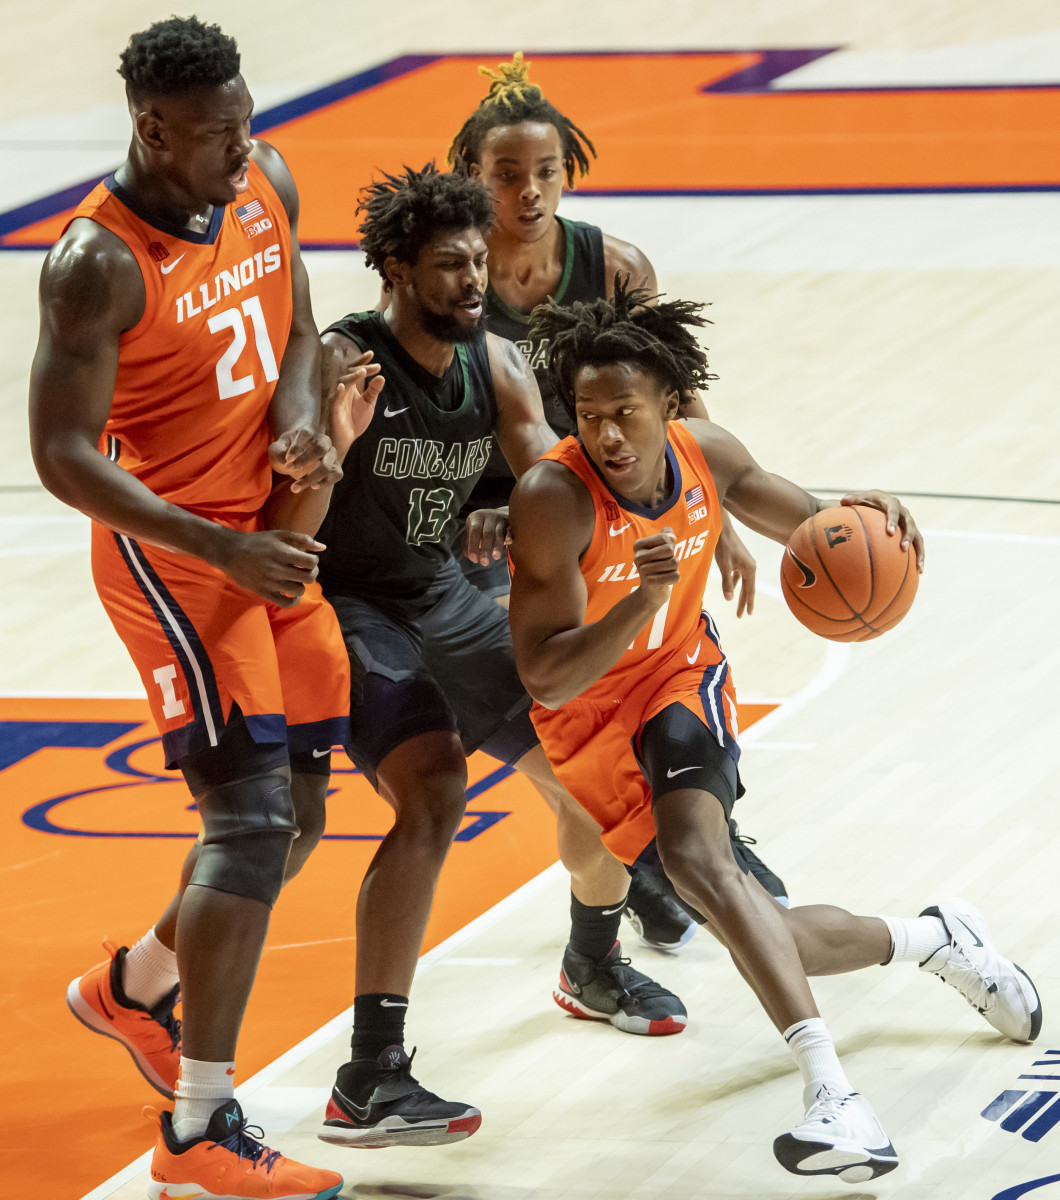 Illinois Fighting Illini guard Ayo Dosunmu (11) drives against Chicago State Cougars forward Aaris-Monte Bonds (13) as center Kofi Cockburn (21) defends during the first half at the State Farm Center.